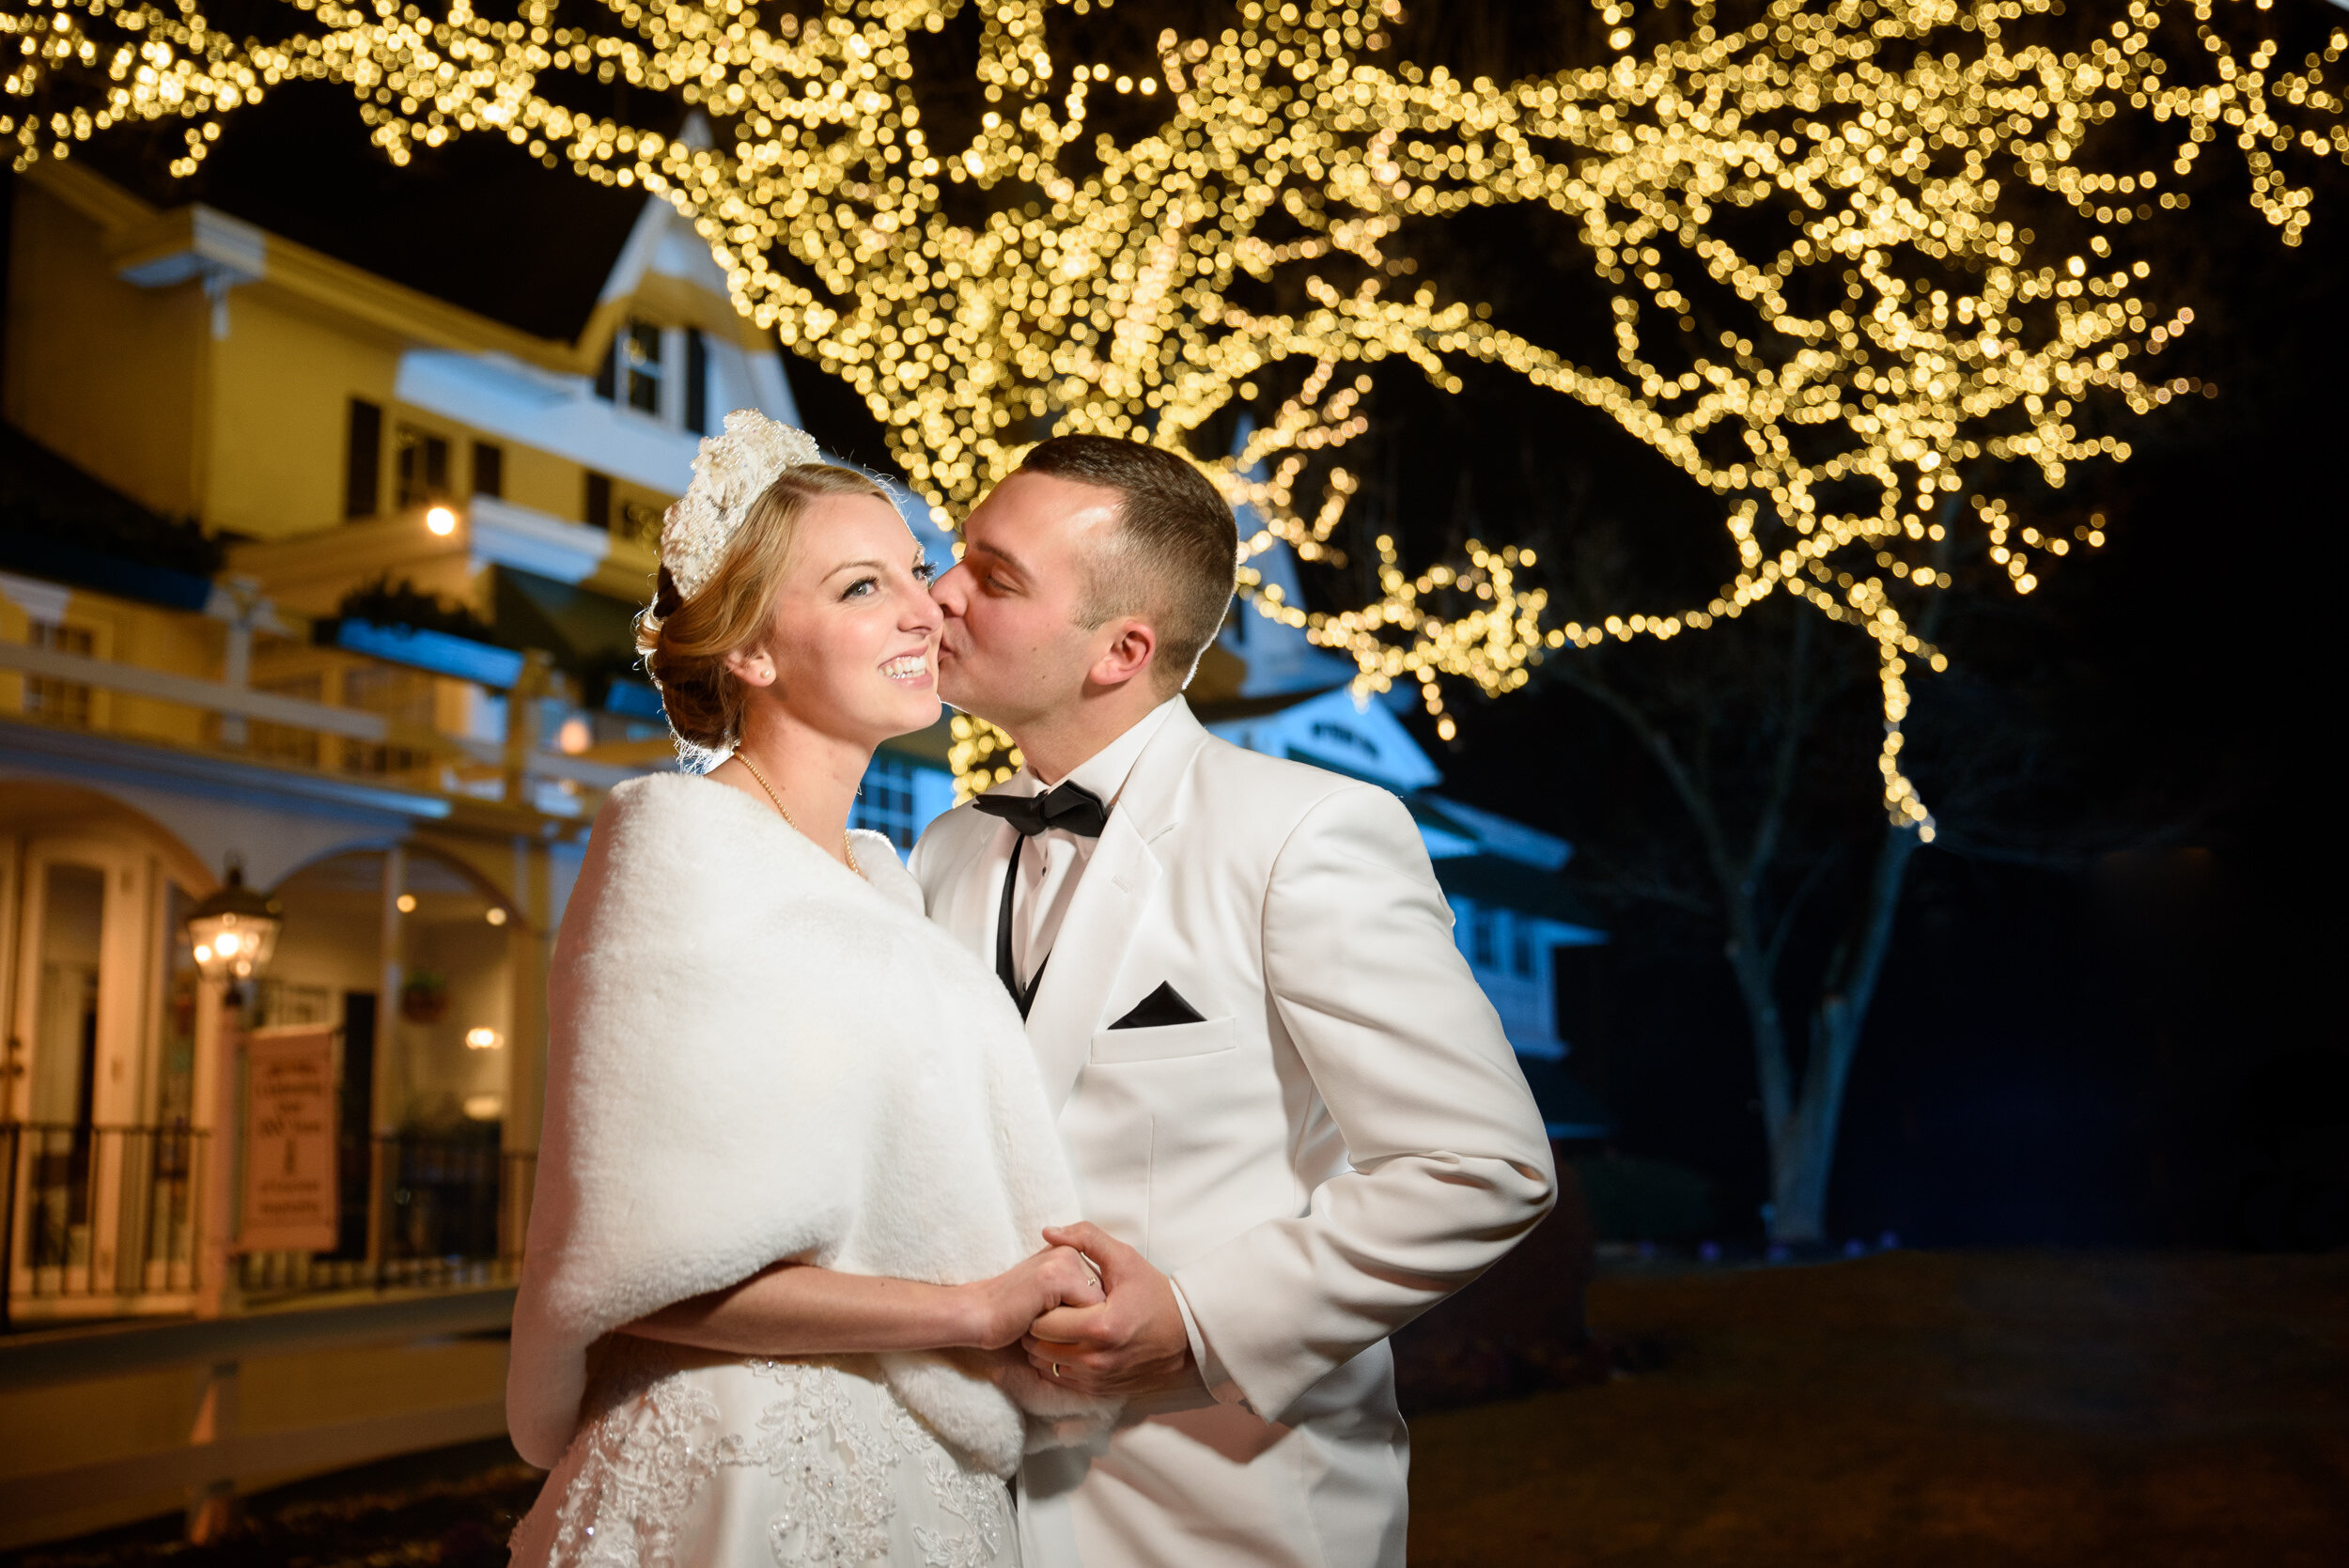 Bride and groom in front of the twinkle lights at William Penn Inn wedding